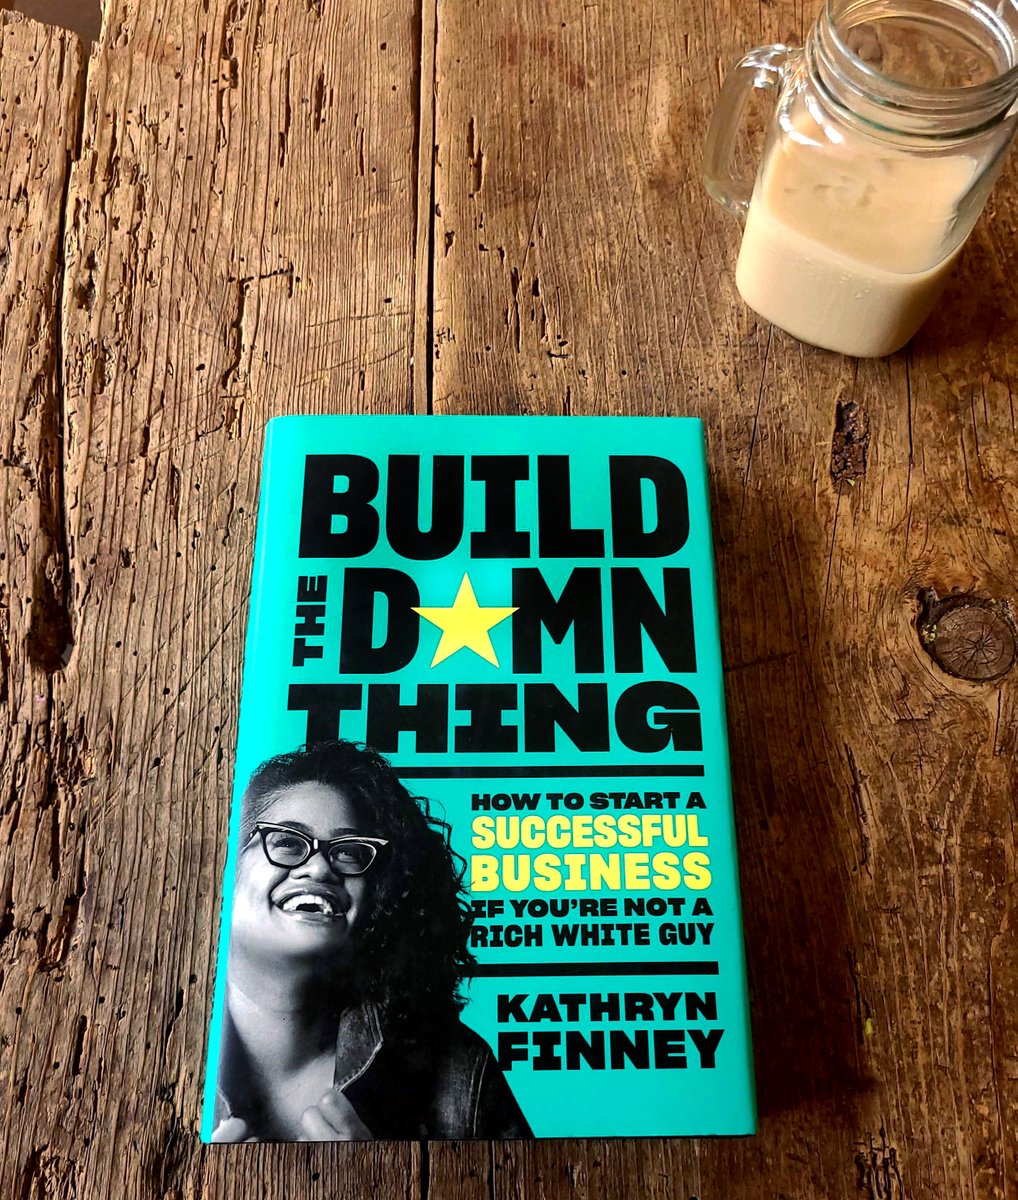 Overcome your naysayers and BUILD THE DAMN THING with entrepreneur @KathrynFinney's indispensable guide for diverse entrepreneurs. 💫